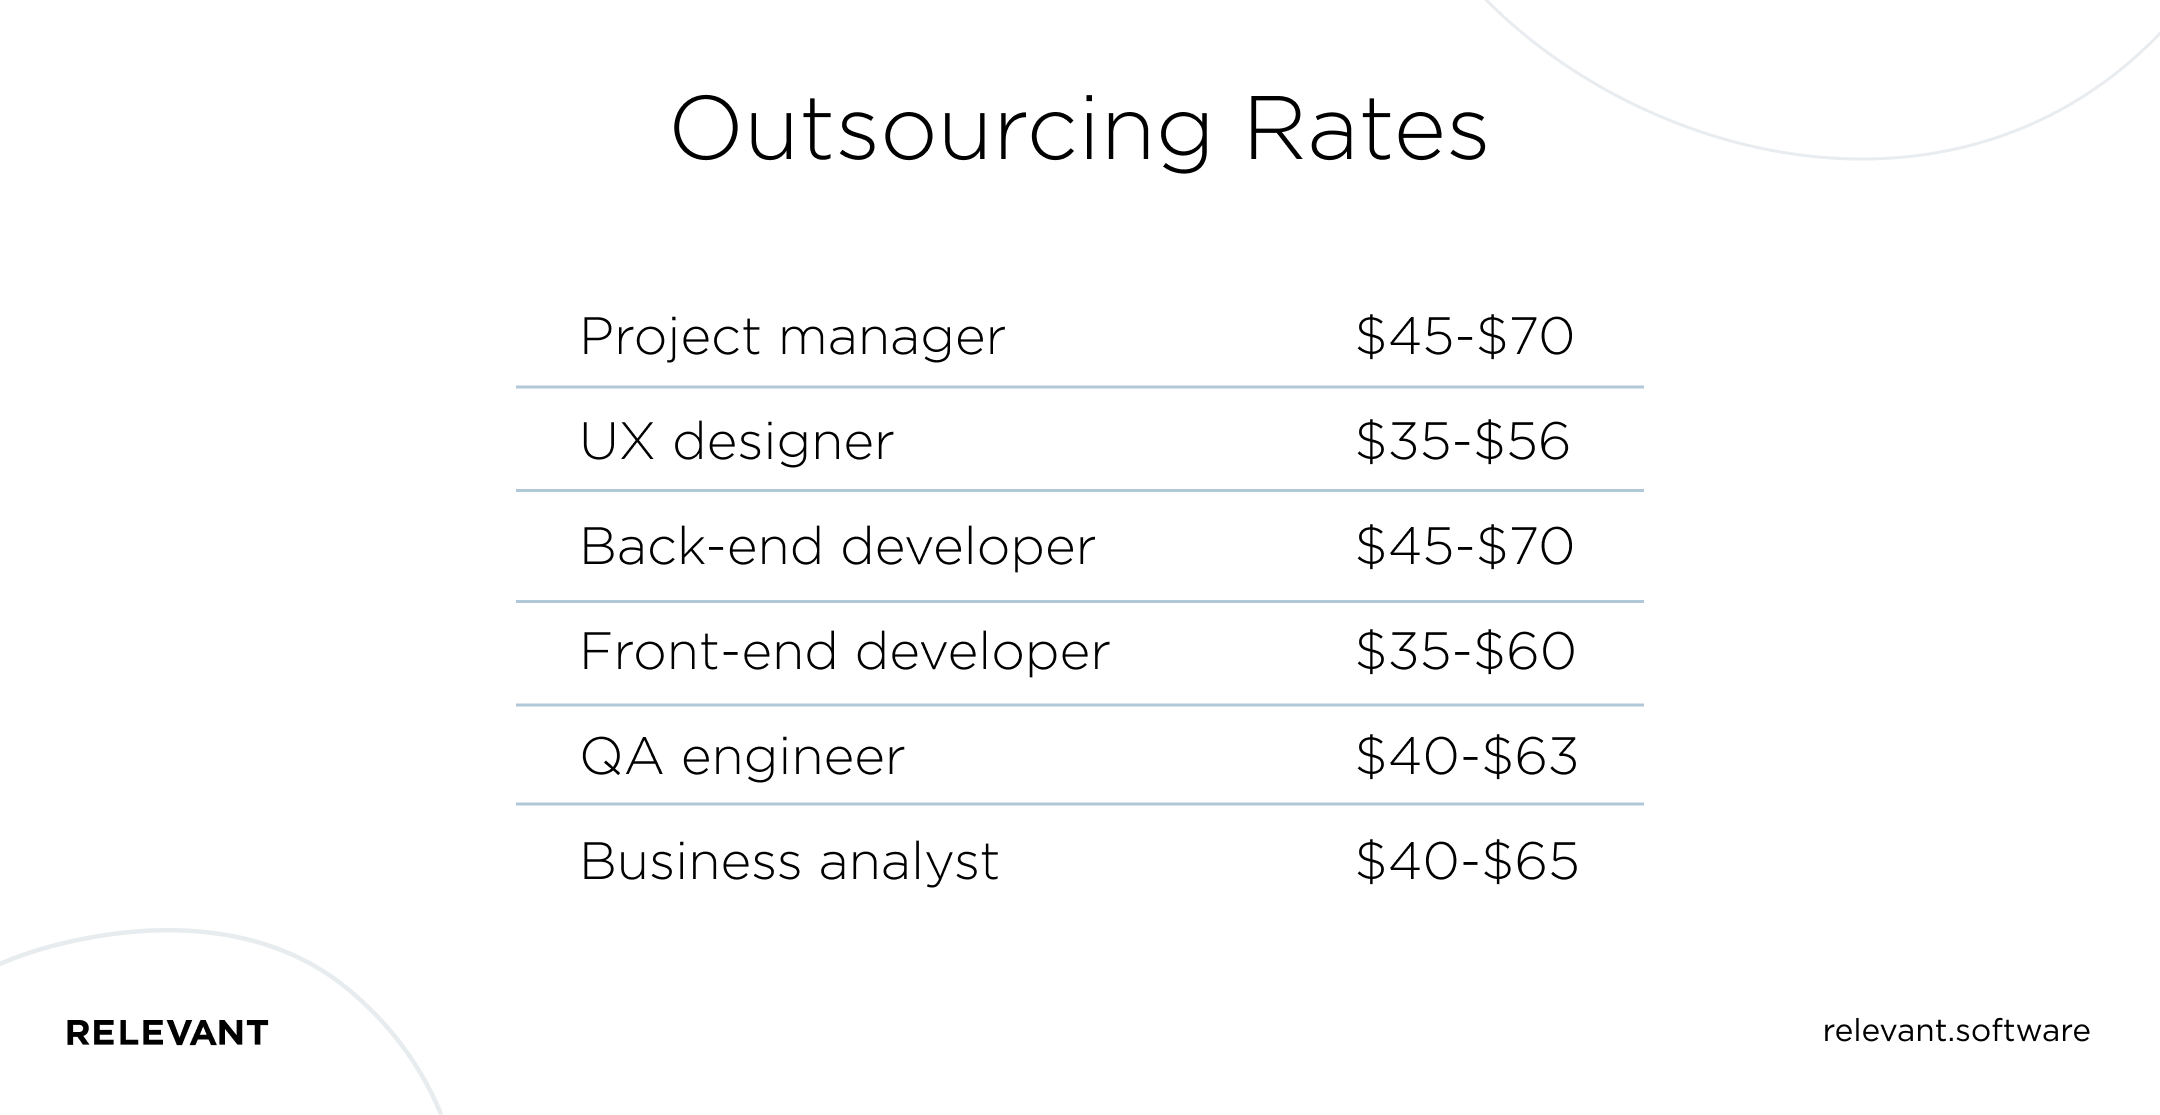 Outsourcing Rates at Relevant